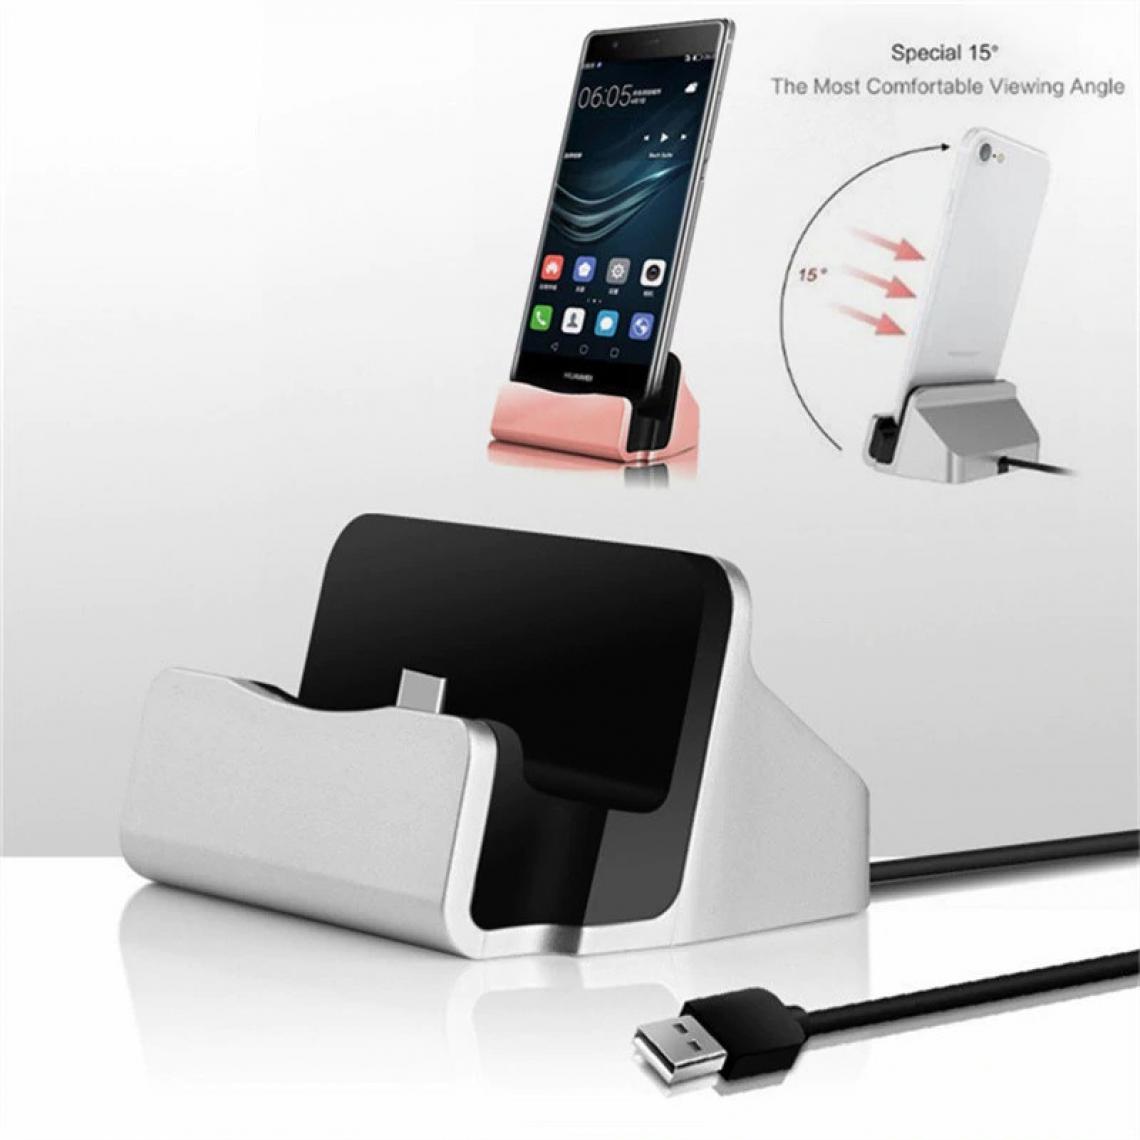 Shot - Station d'Accueil de Chargement pour HUAWEI Ascend Mate 7 Smartphone Micro USB Support Chargeur Bureau (ROSE) - Station d'accueil smartphone